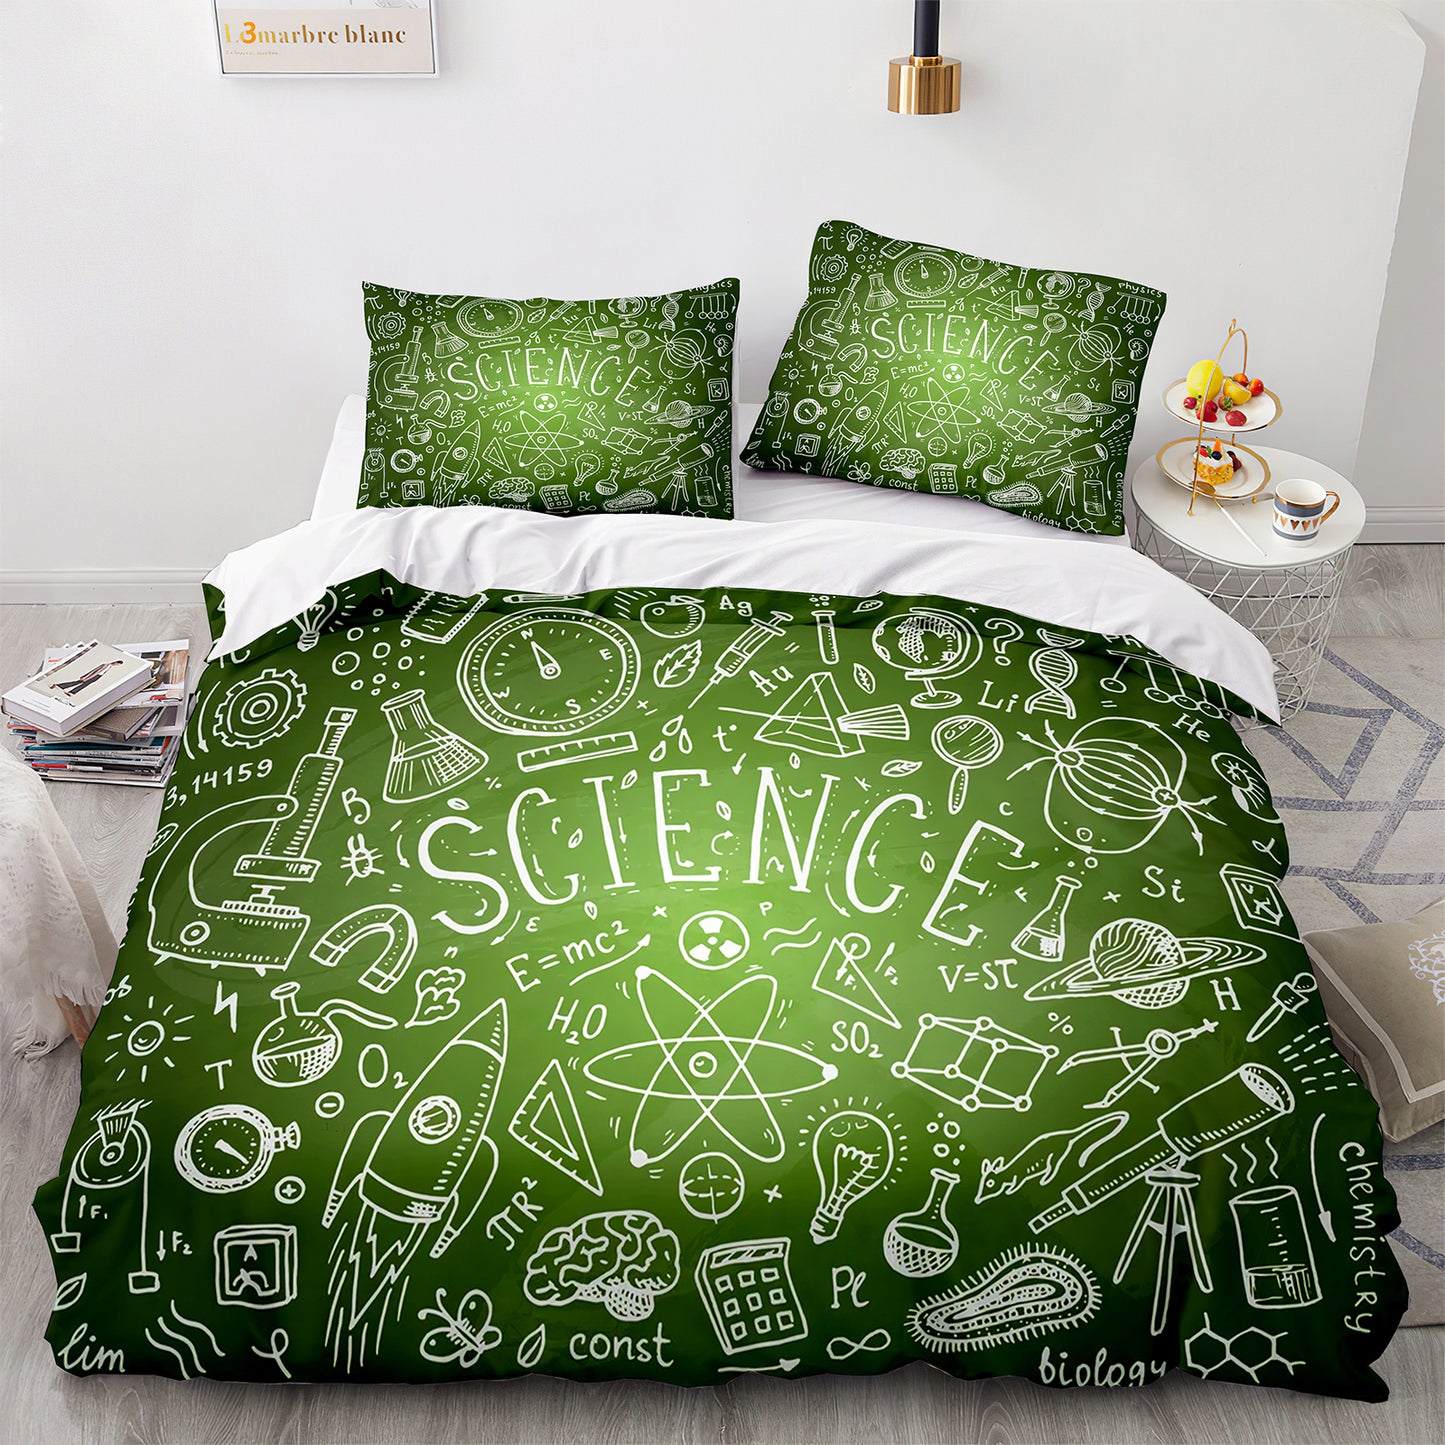 Cutom Duvet Cover Set Pattern Chic Comforter Cover King Size for Teens Adults Bedding Set with Pillowcases  GS3010